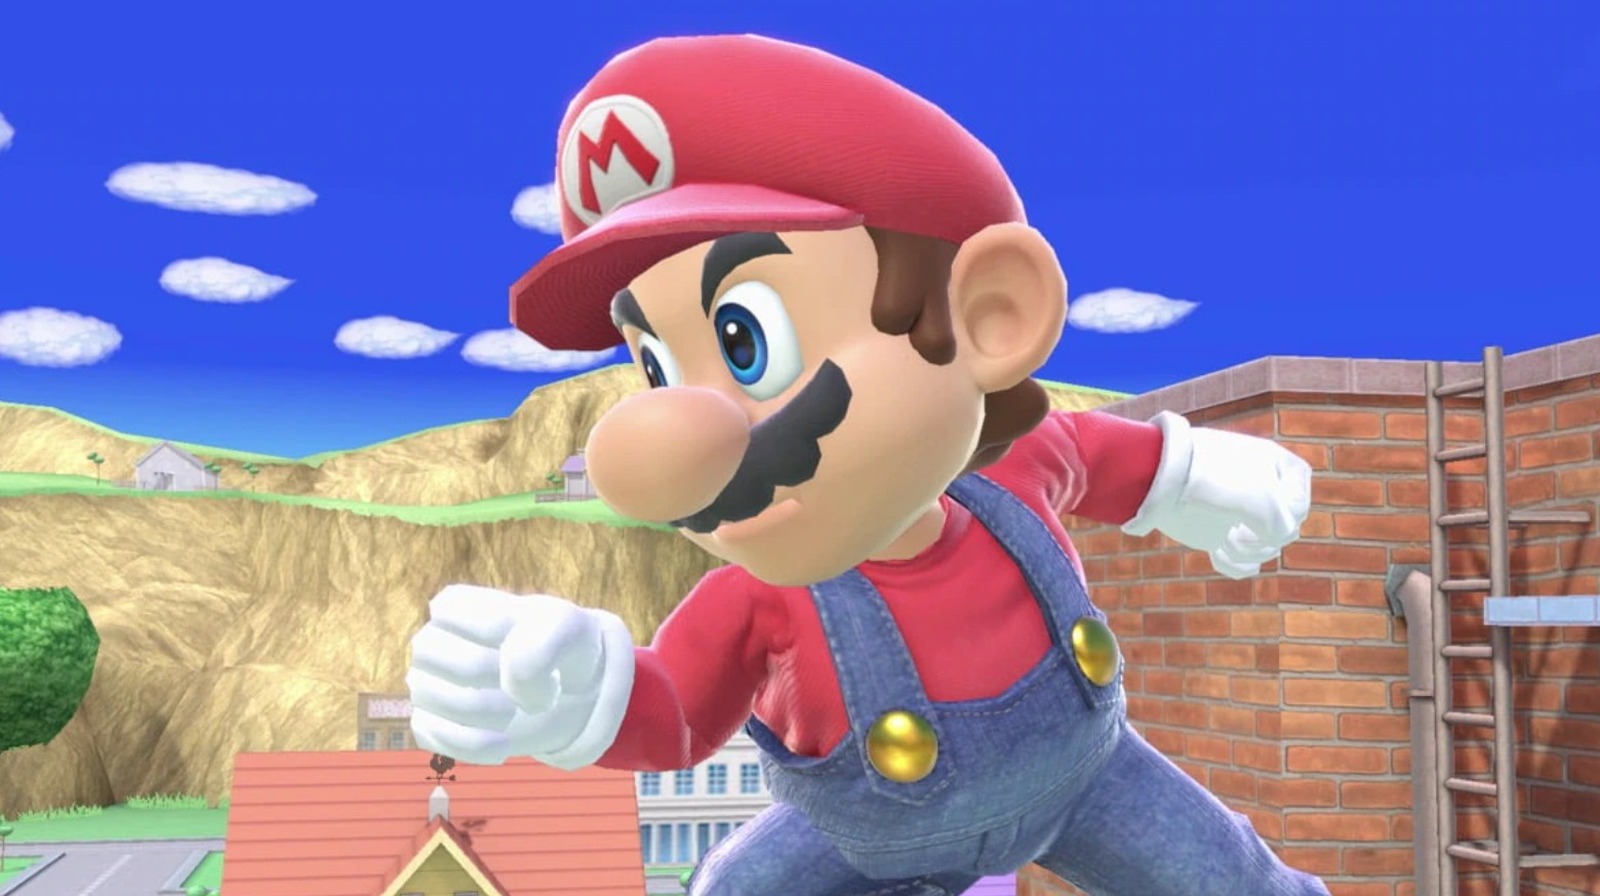 Smash Bros. Ultimate review: The best fighting game on any